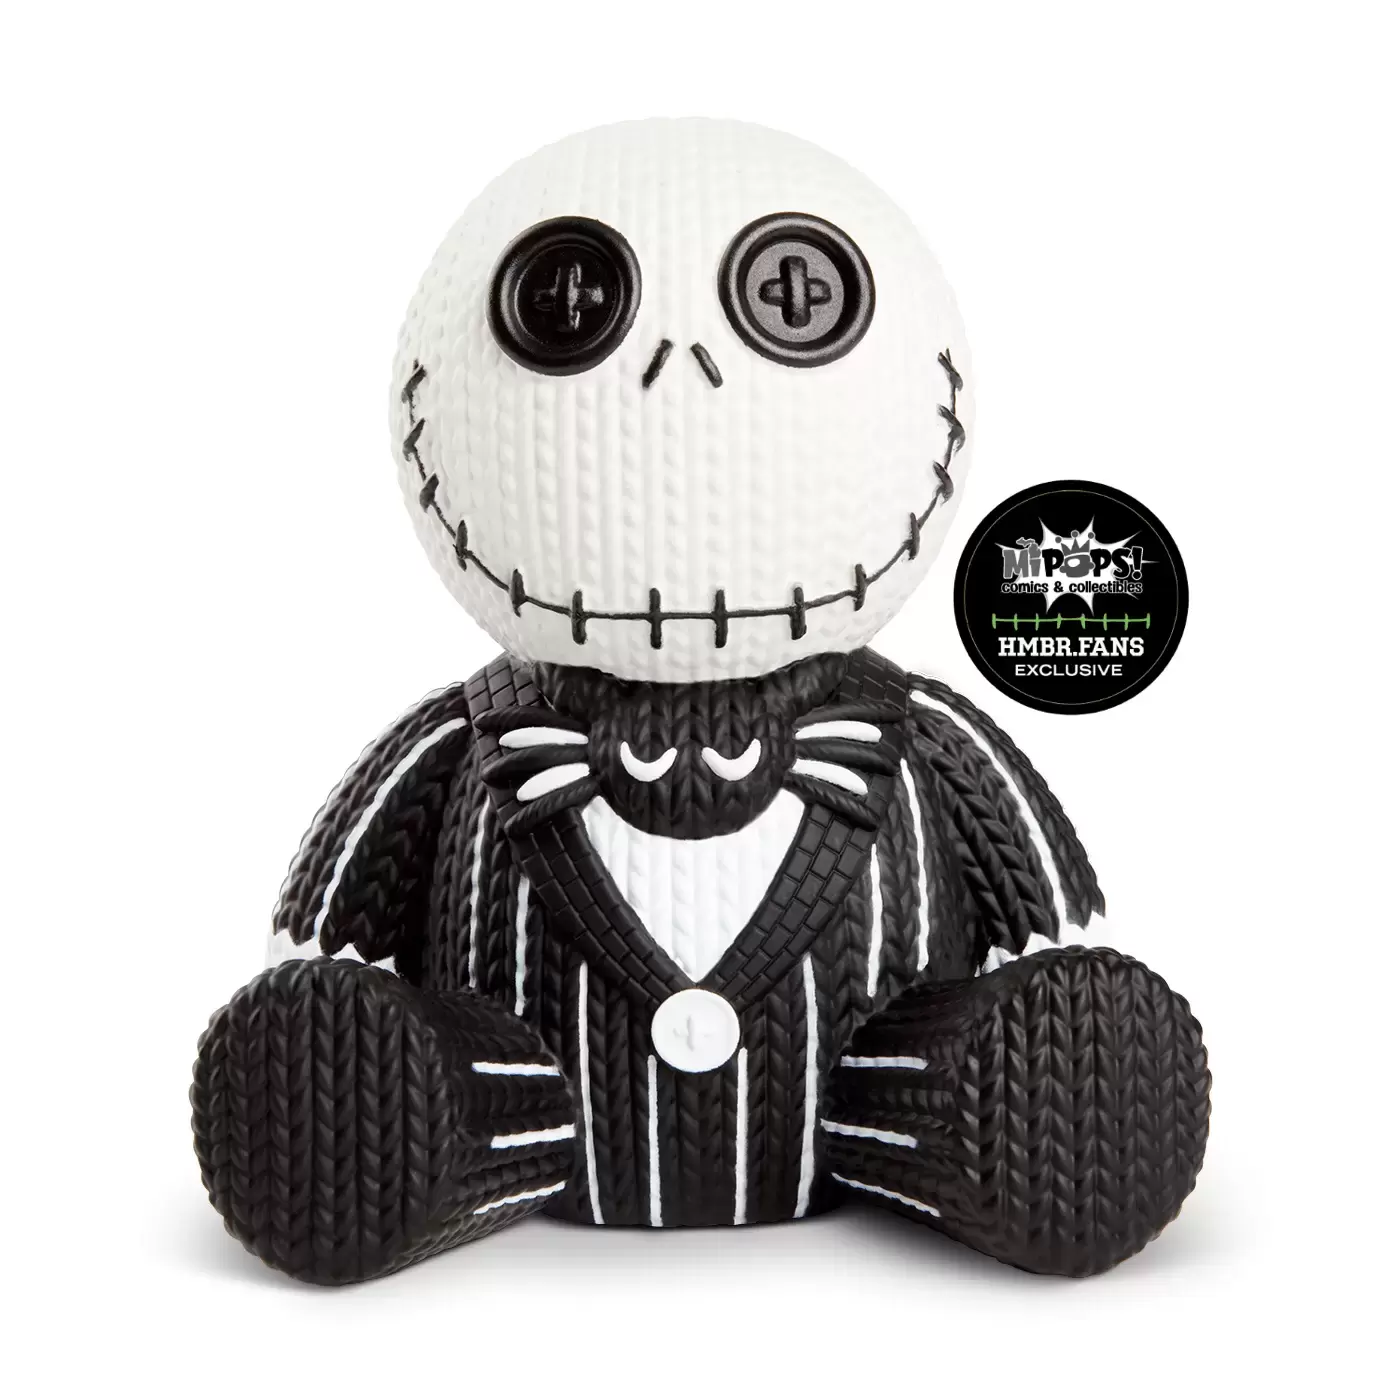 Handmade By Robots - Jack Skellington Glow in the Dark MiPOPS Shared Exclusive- Limited Edition 720 pcs.